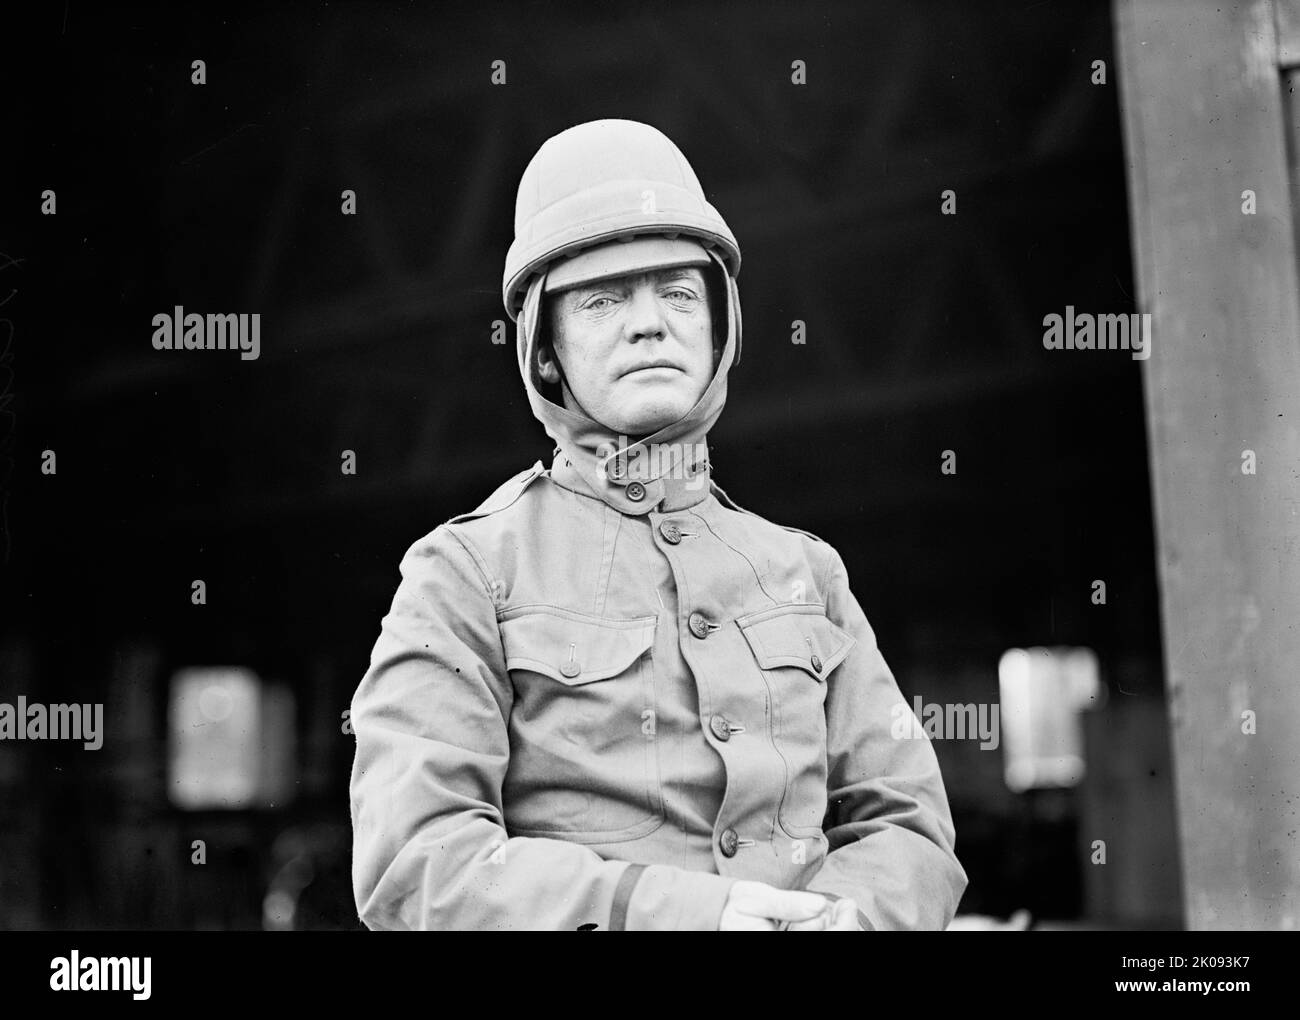 Army Aviation, College Park - Aviator 2nd Lt. Harry Graham, U.S.Army Infantry, 1912. [Early test flights in Maryland. Lieutenant Graham flew Wright Brothers aircraft]. Stock Photo